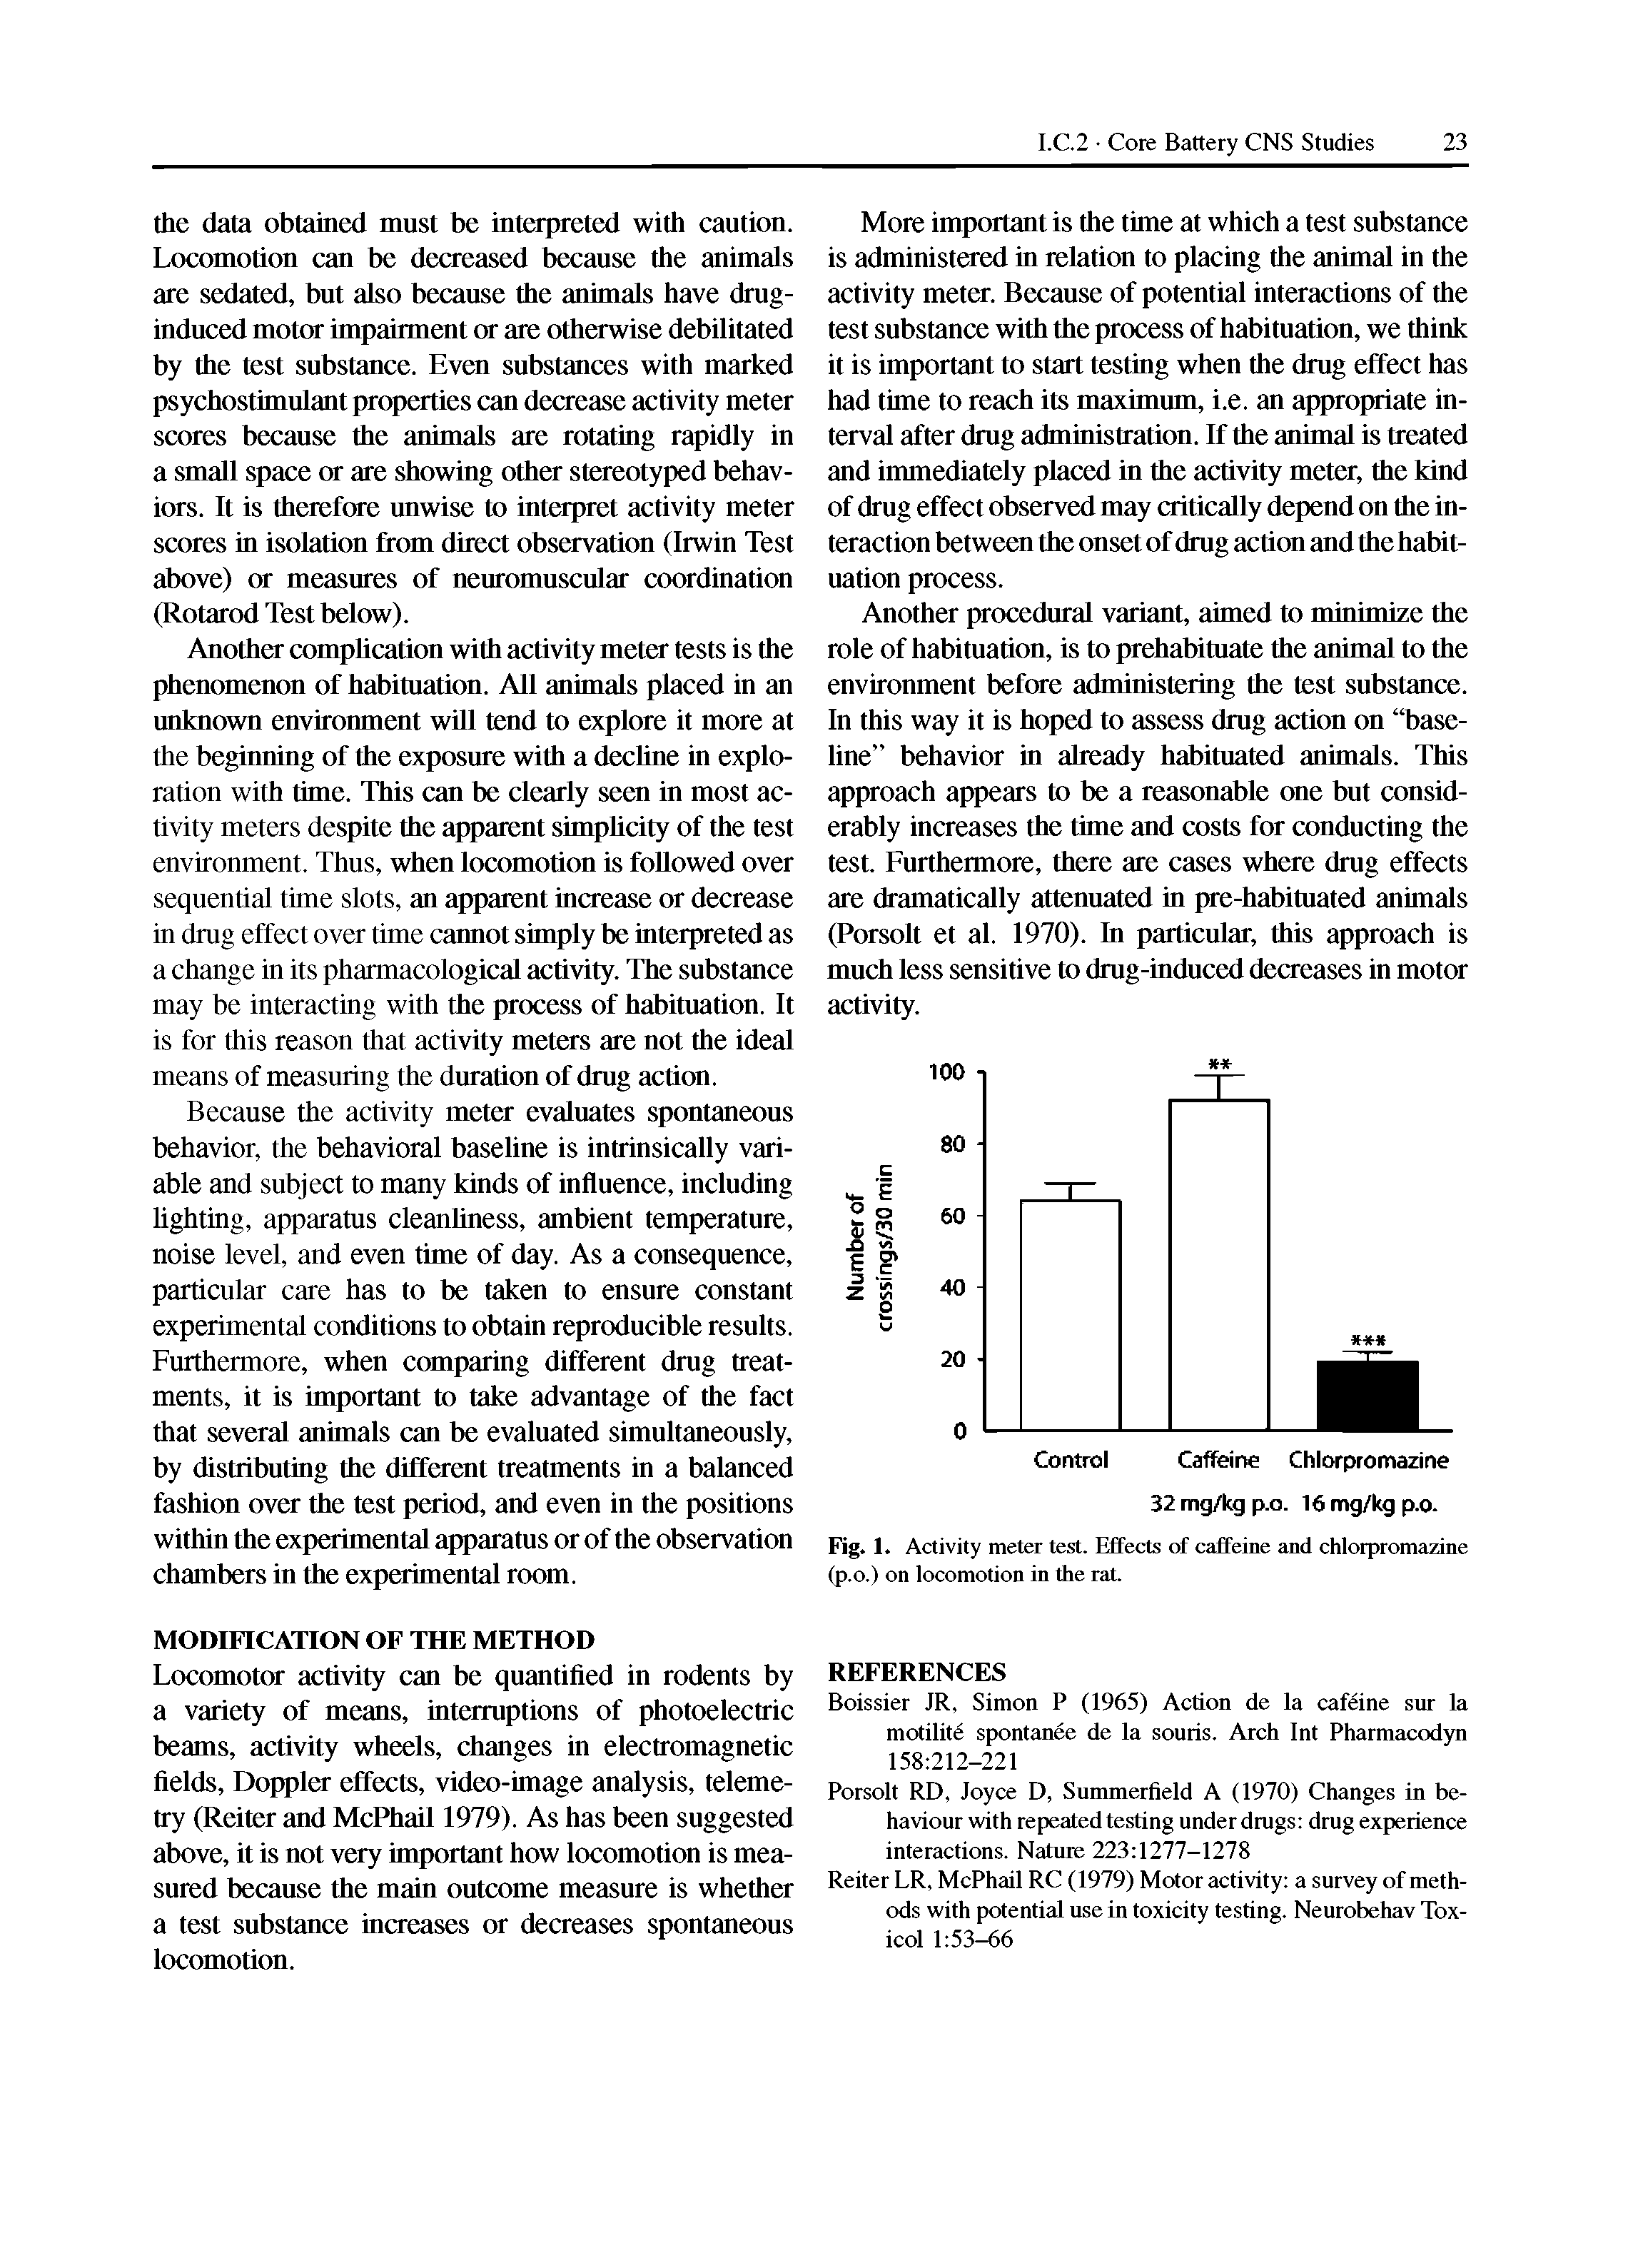 Fig. 1. Activity meter test. Effects of caffeine and chlorpromazine (p.o.) on locomotion in the rat.